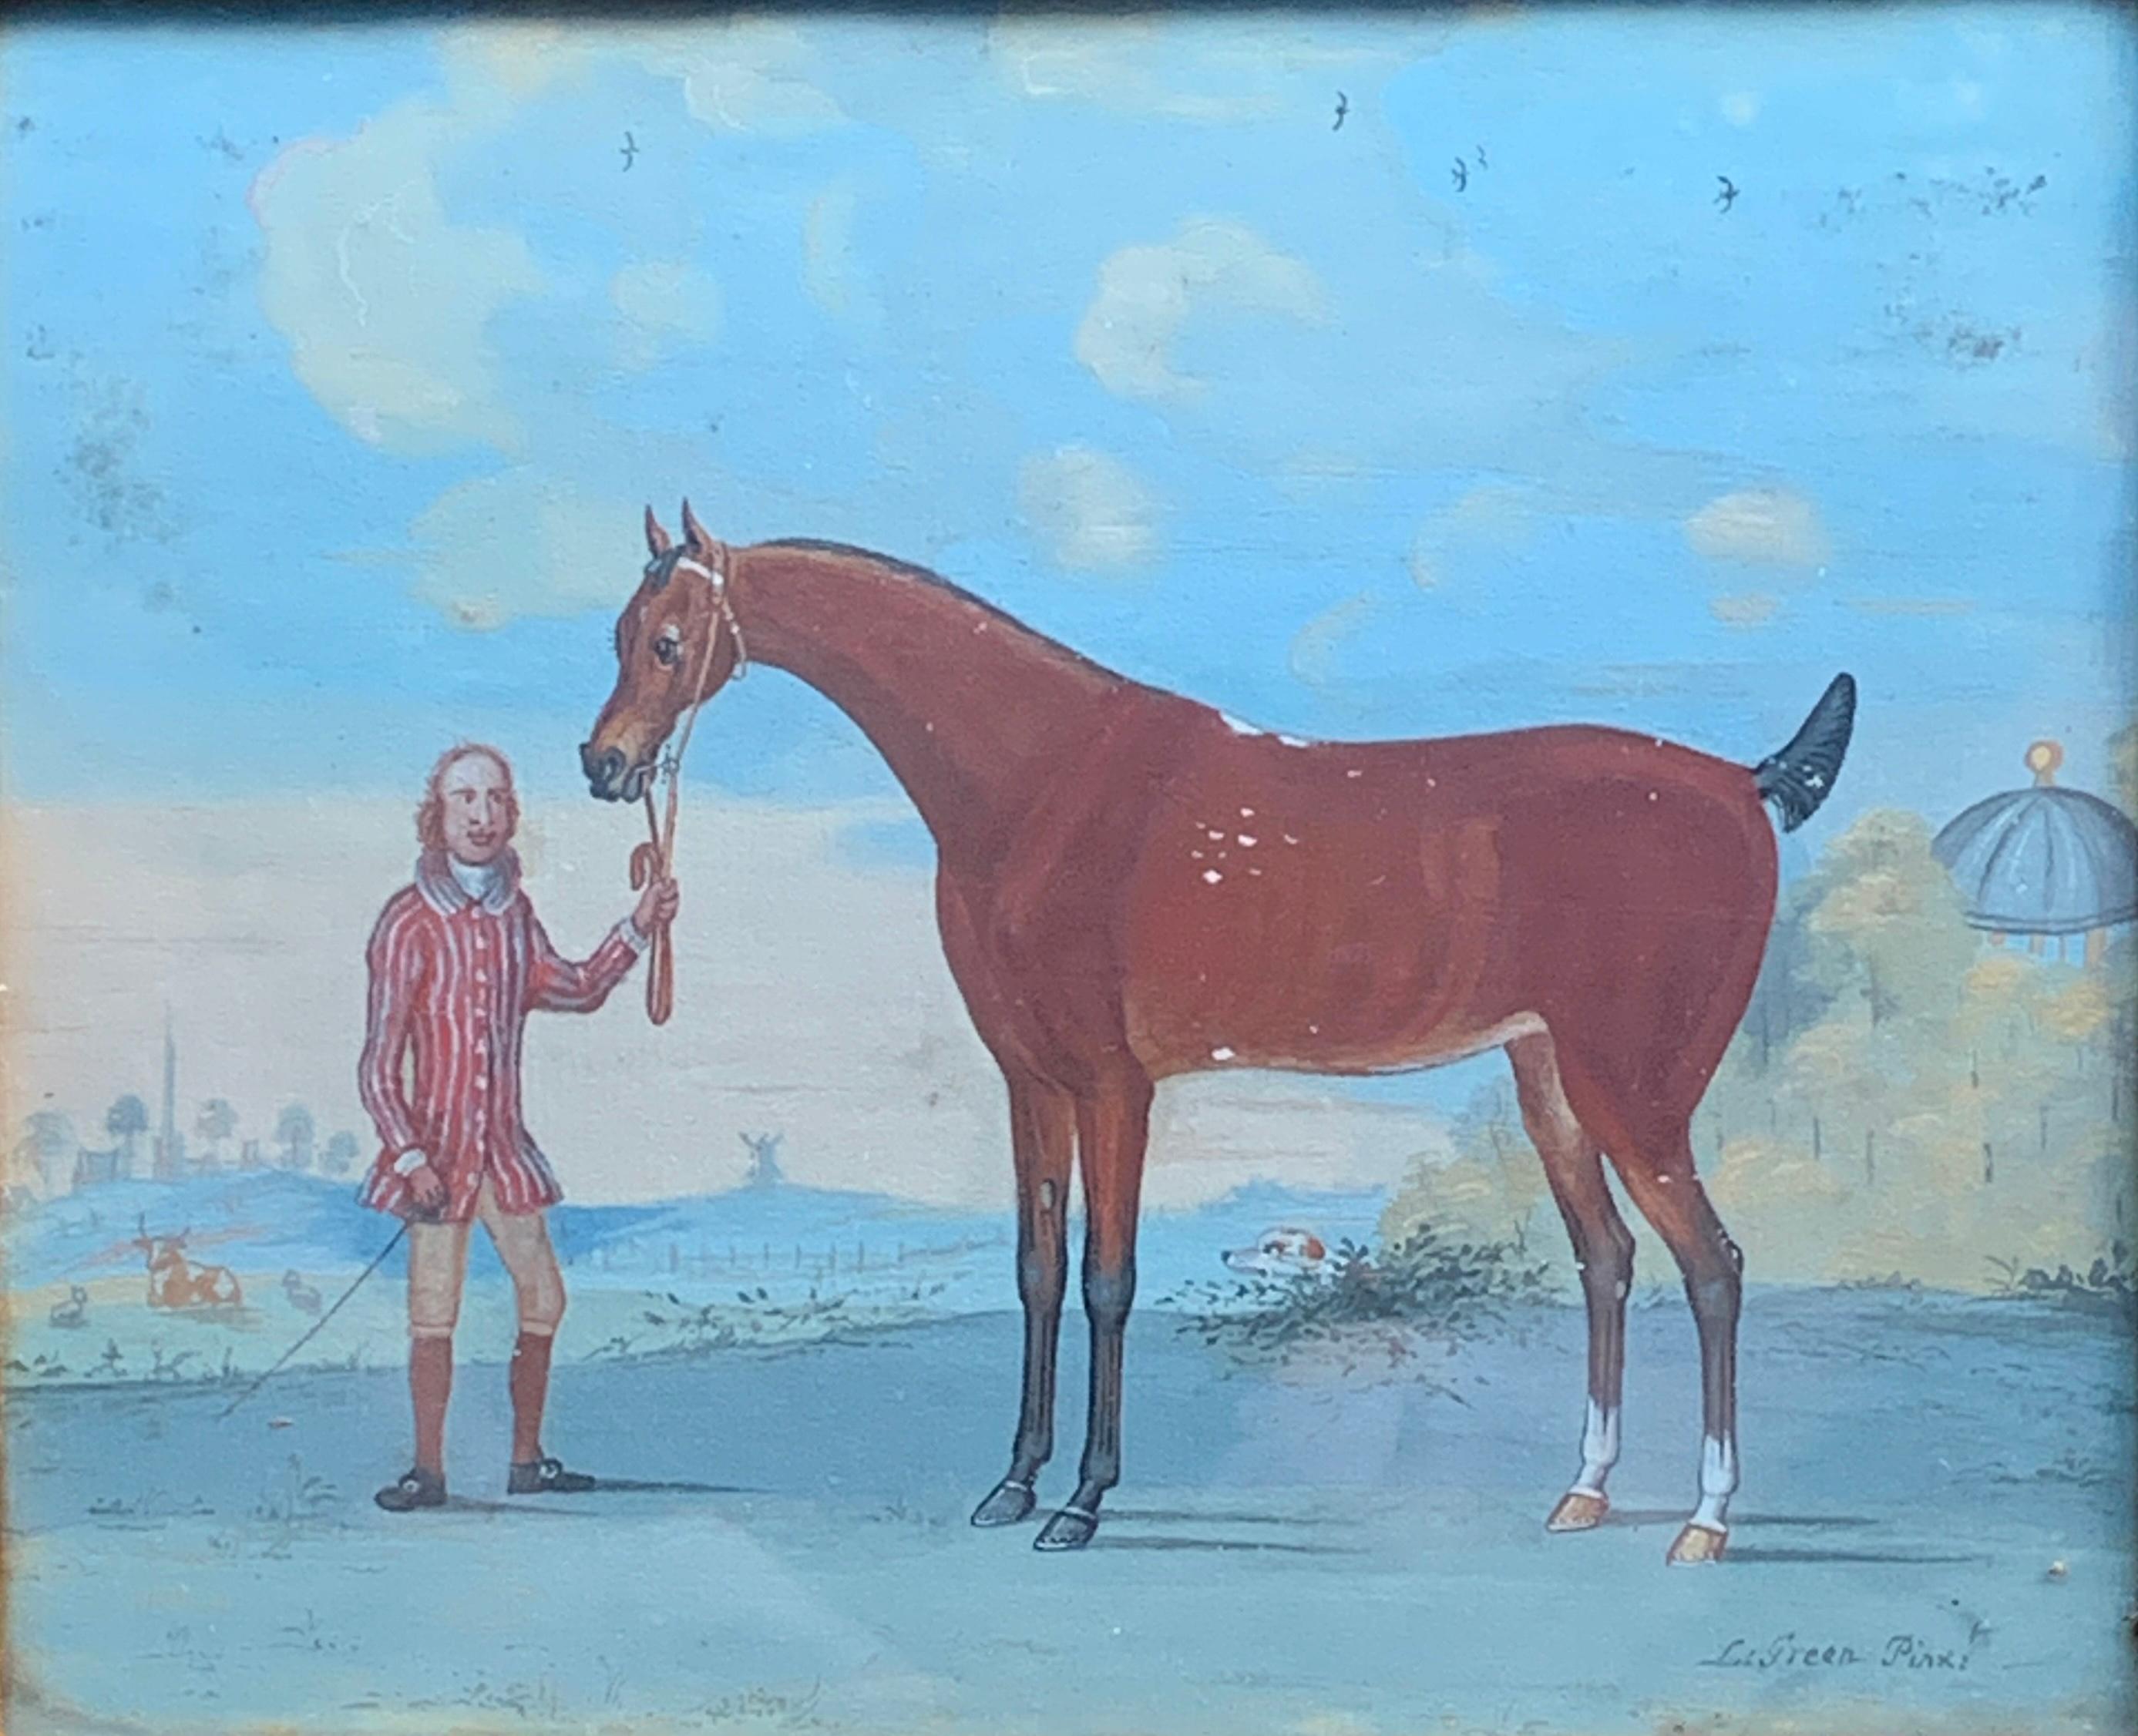 18th century English scene of a groom with a horse in a landscape - Painting by L.Green